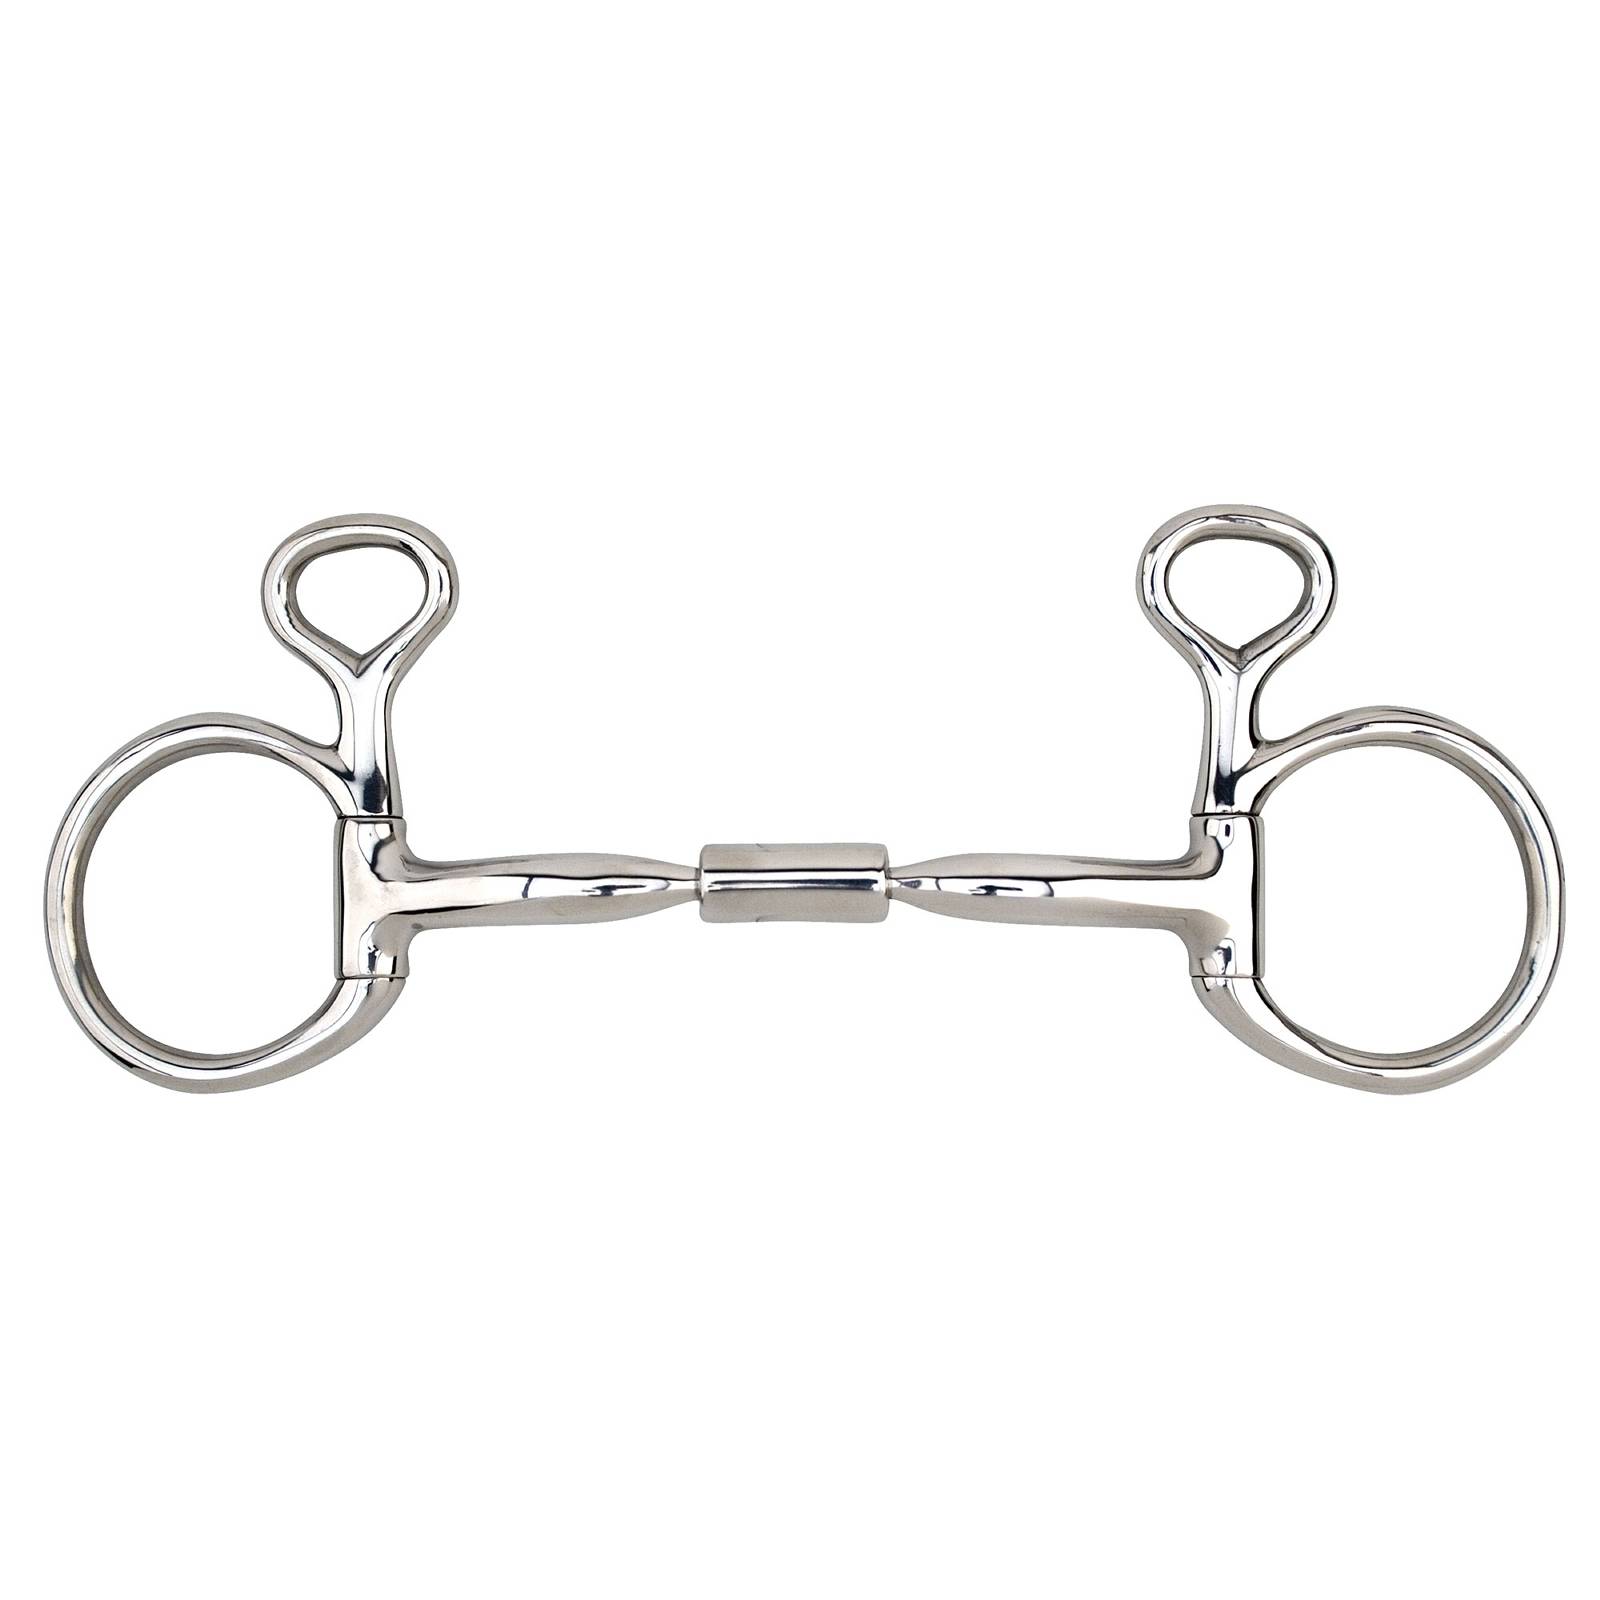 5 5.5 & 6" Boucher French Link Snaffle Bit 13 mm Sizes: 4.5 